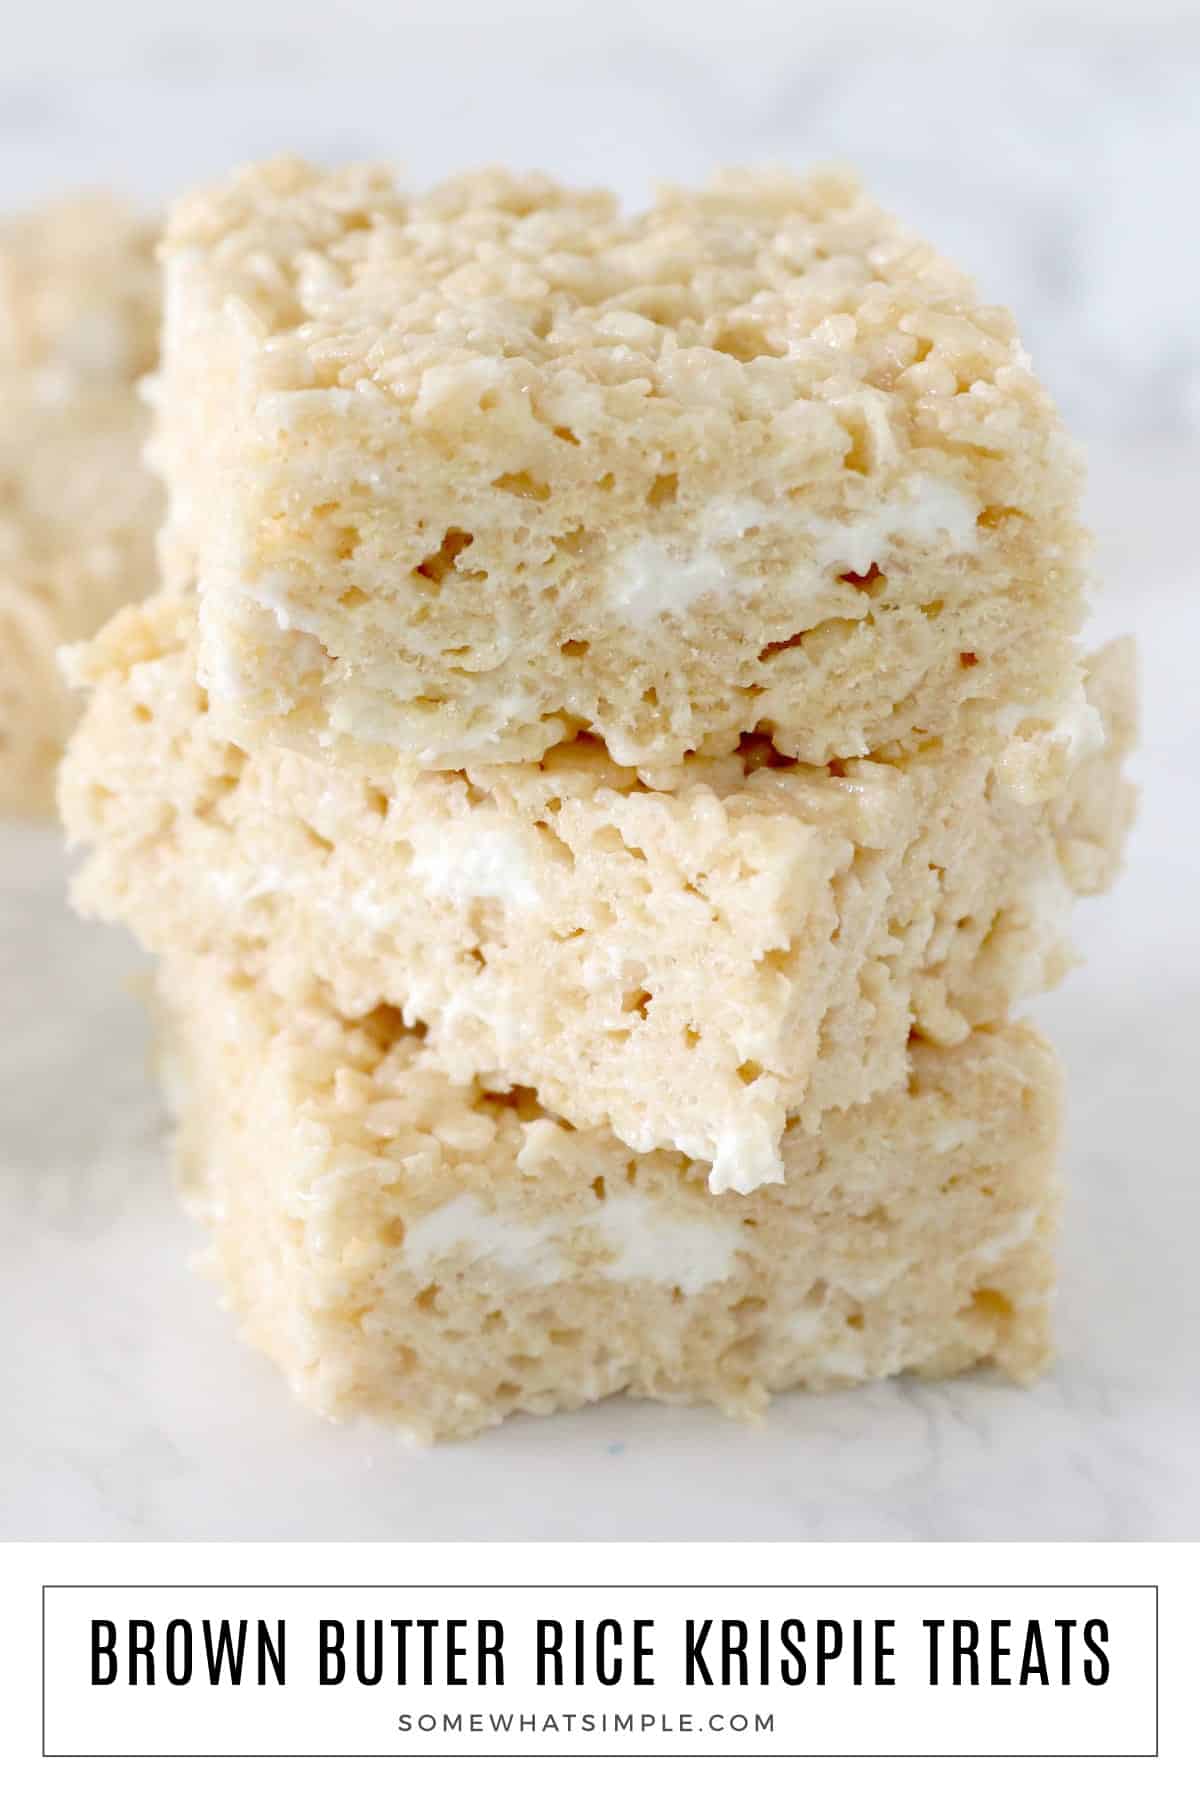 Brown Butter Rice Krispie Treats are sure to be a new family favorite! Ditch the store-bought treats for ones that taste so much better! via @somewhatsimple